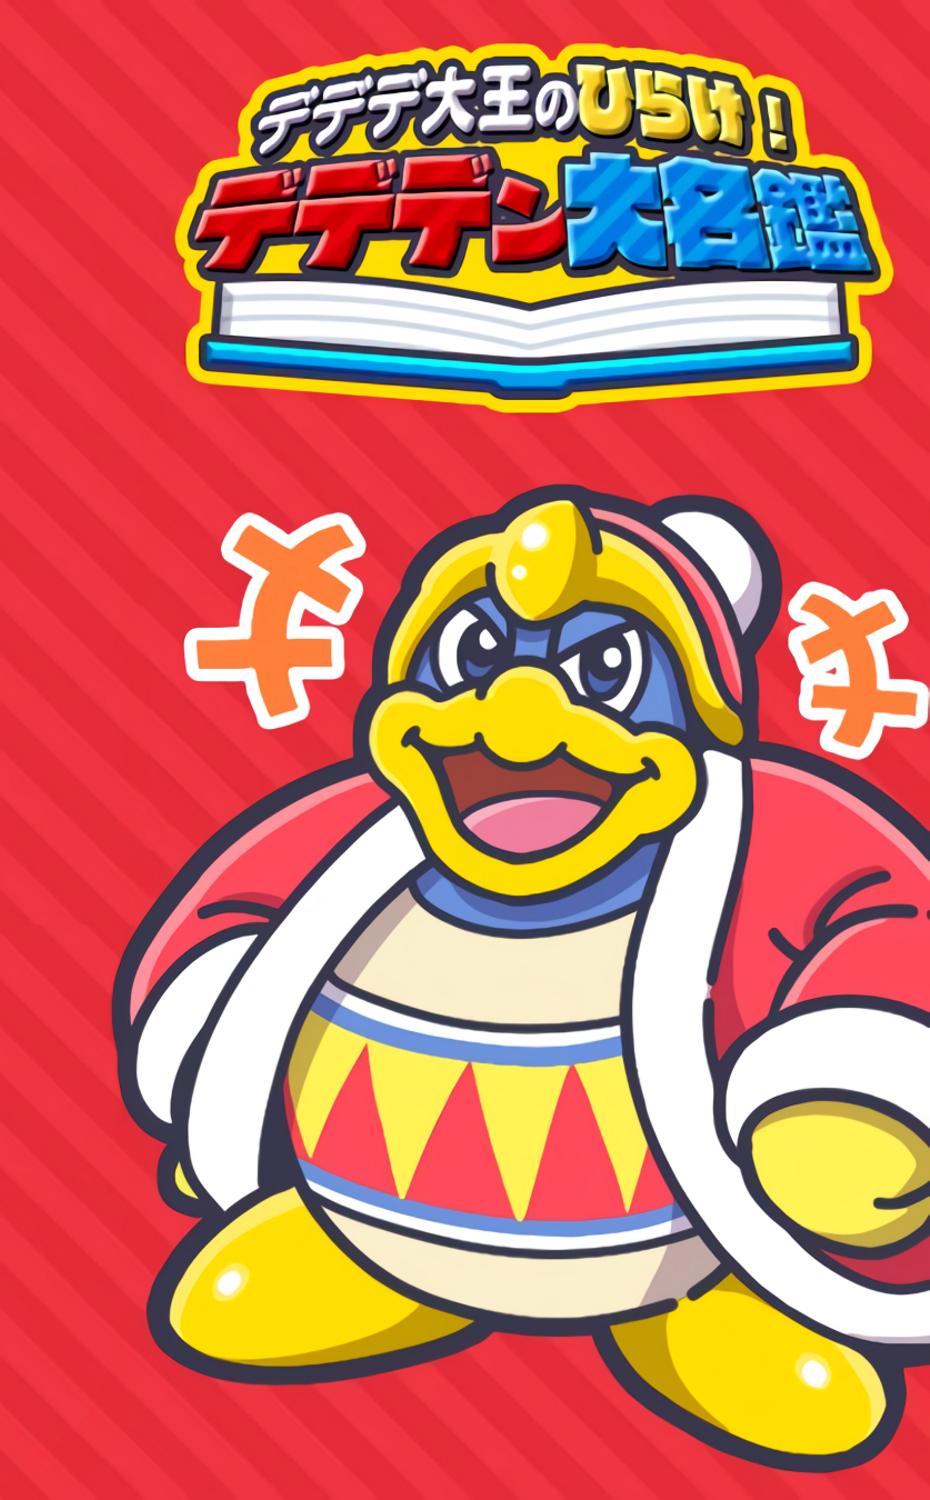 The Great Dedede-Directory (Part 1) / Twitter